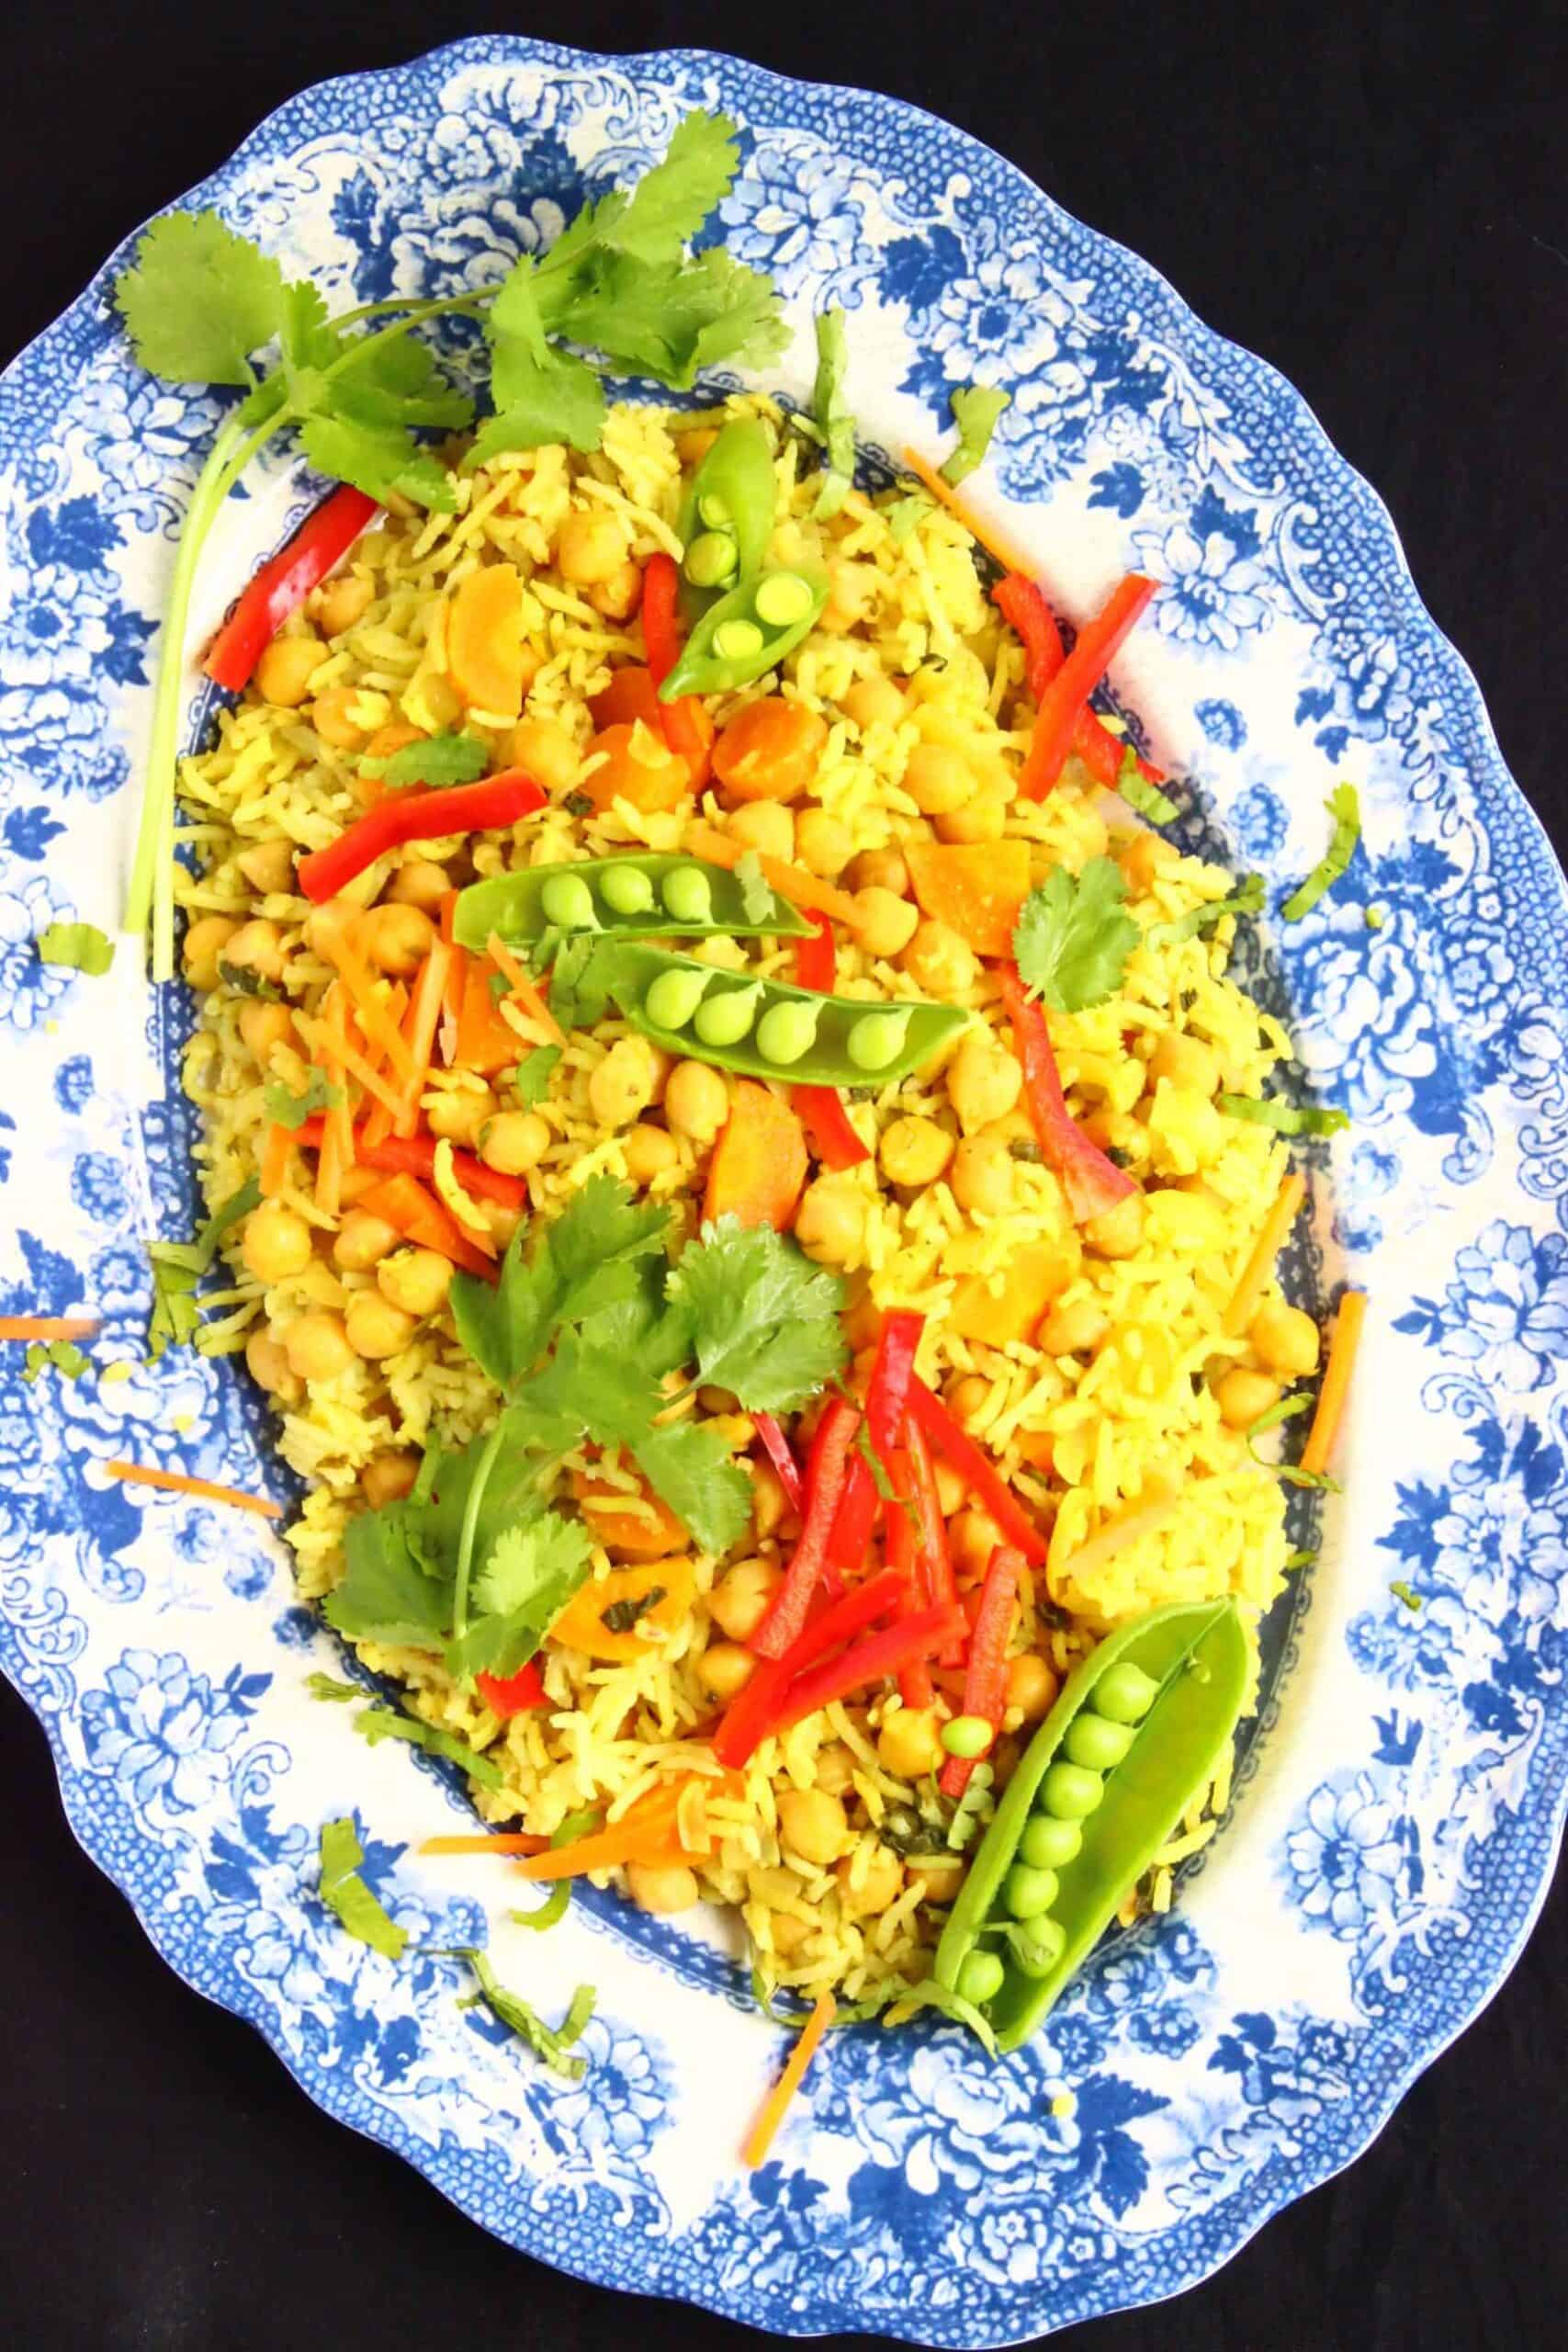 Photo of yellow rice with green and red vegetables on a blue patterned plate against a black background